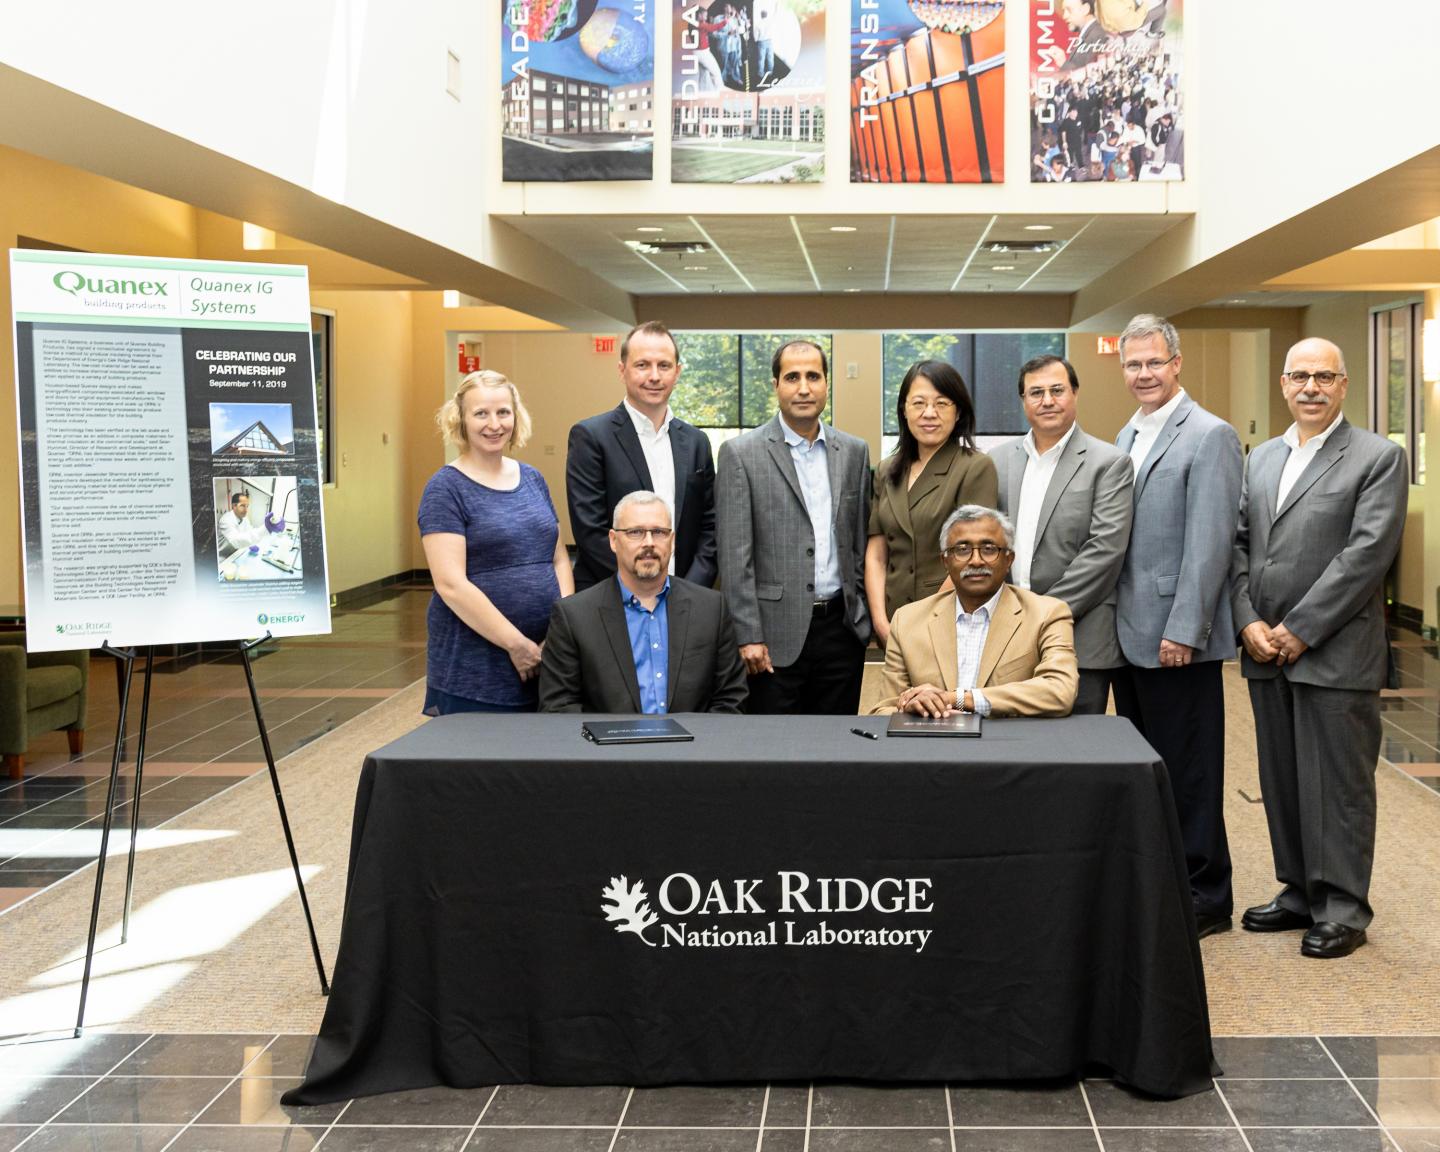 Building Products Manufacturer Licenses ORNL Technology for Increased Thermal Insulation